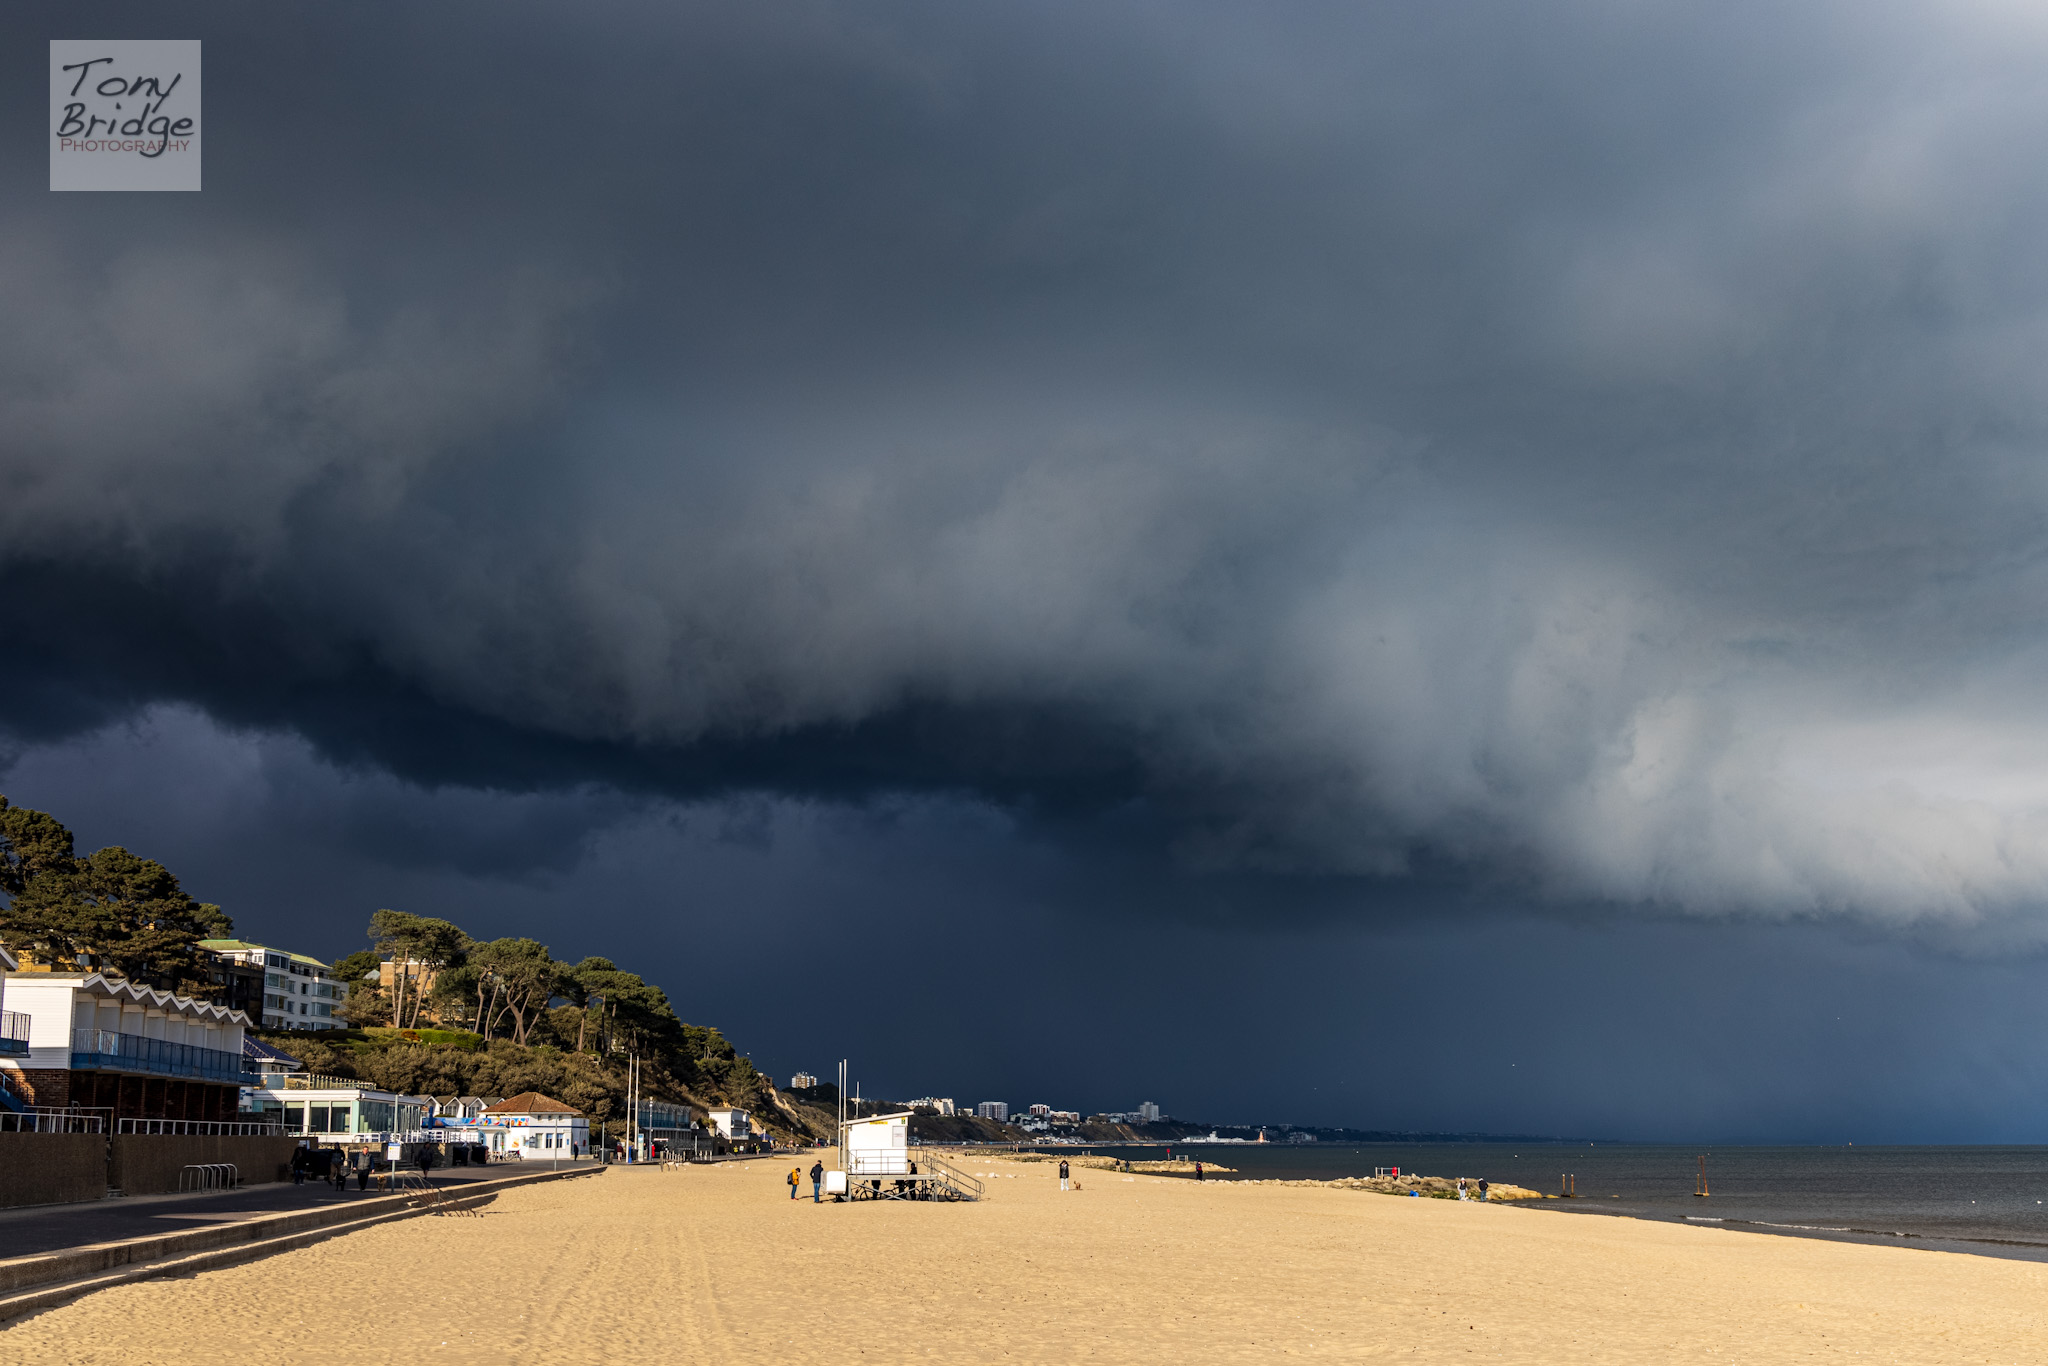 Incoming snowstorm, Bournemouth Beach